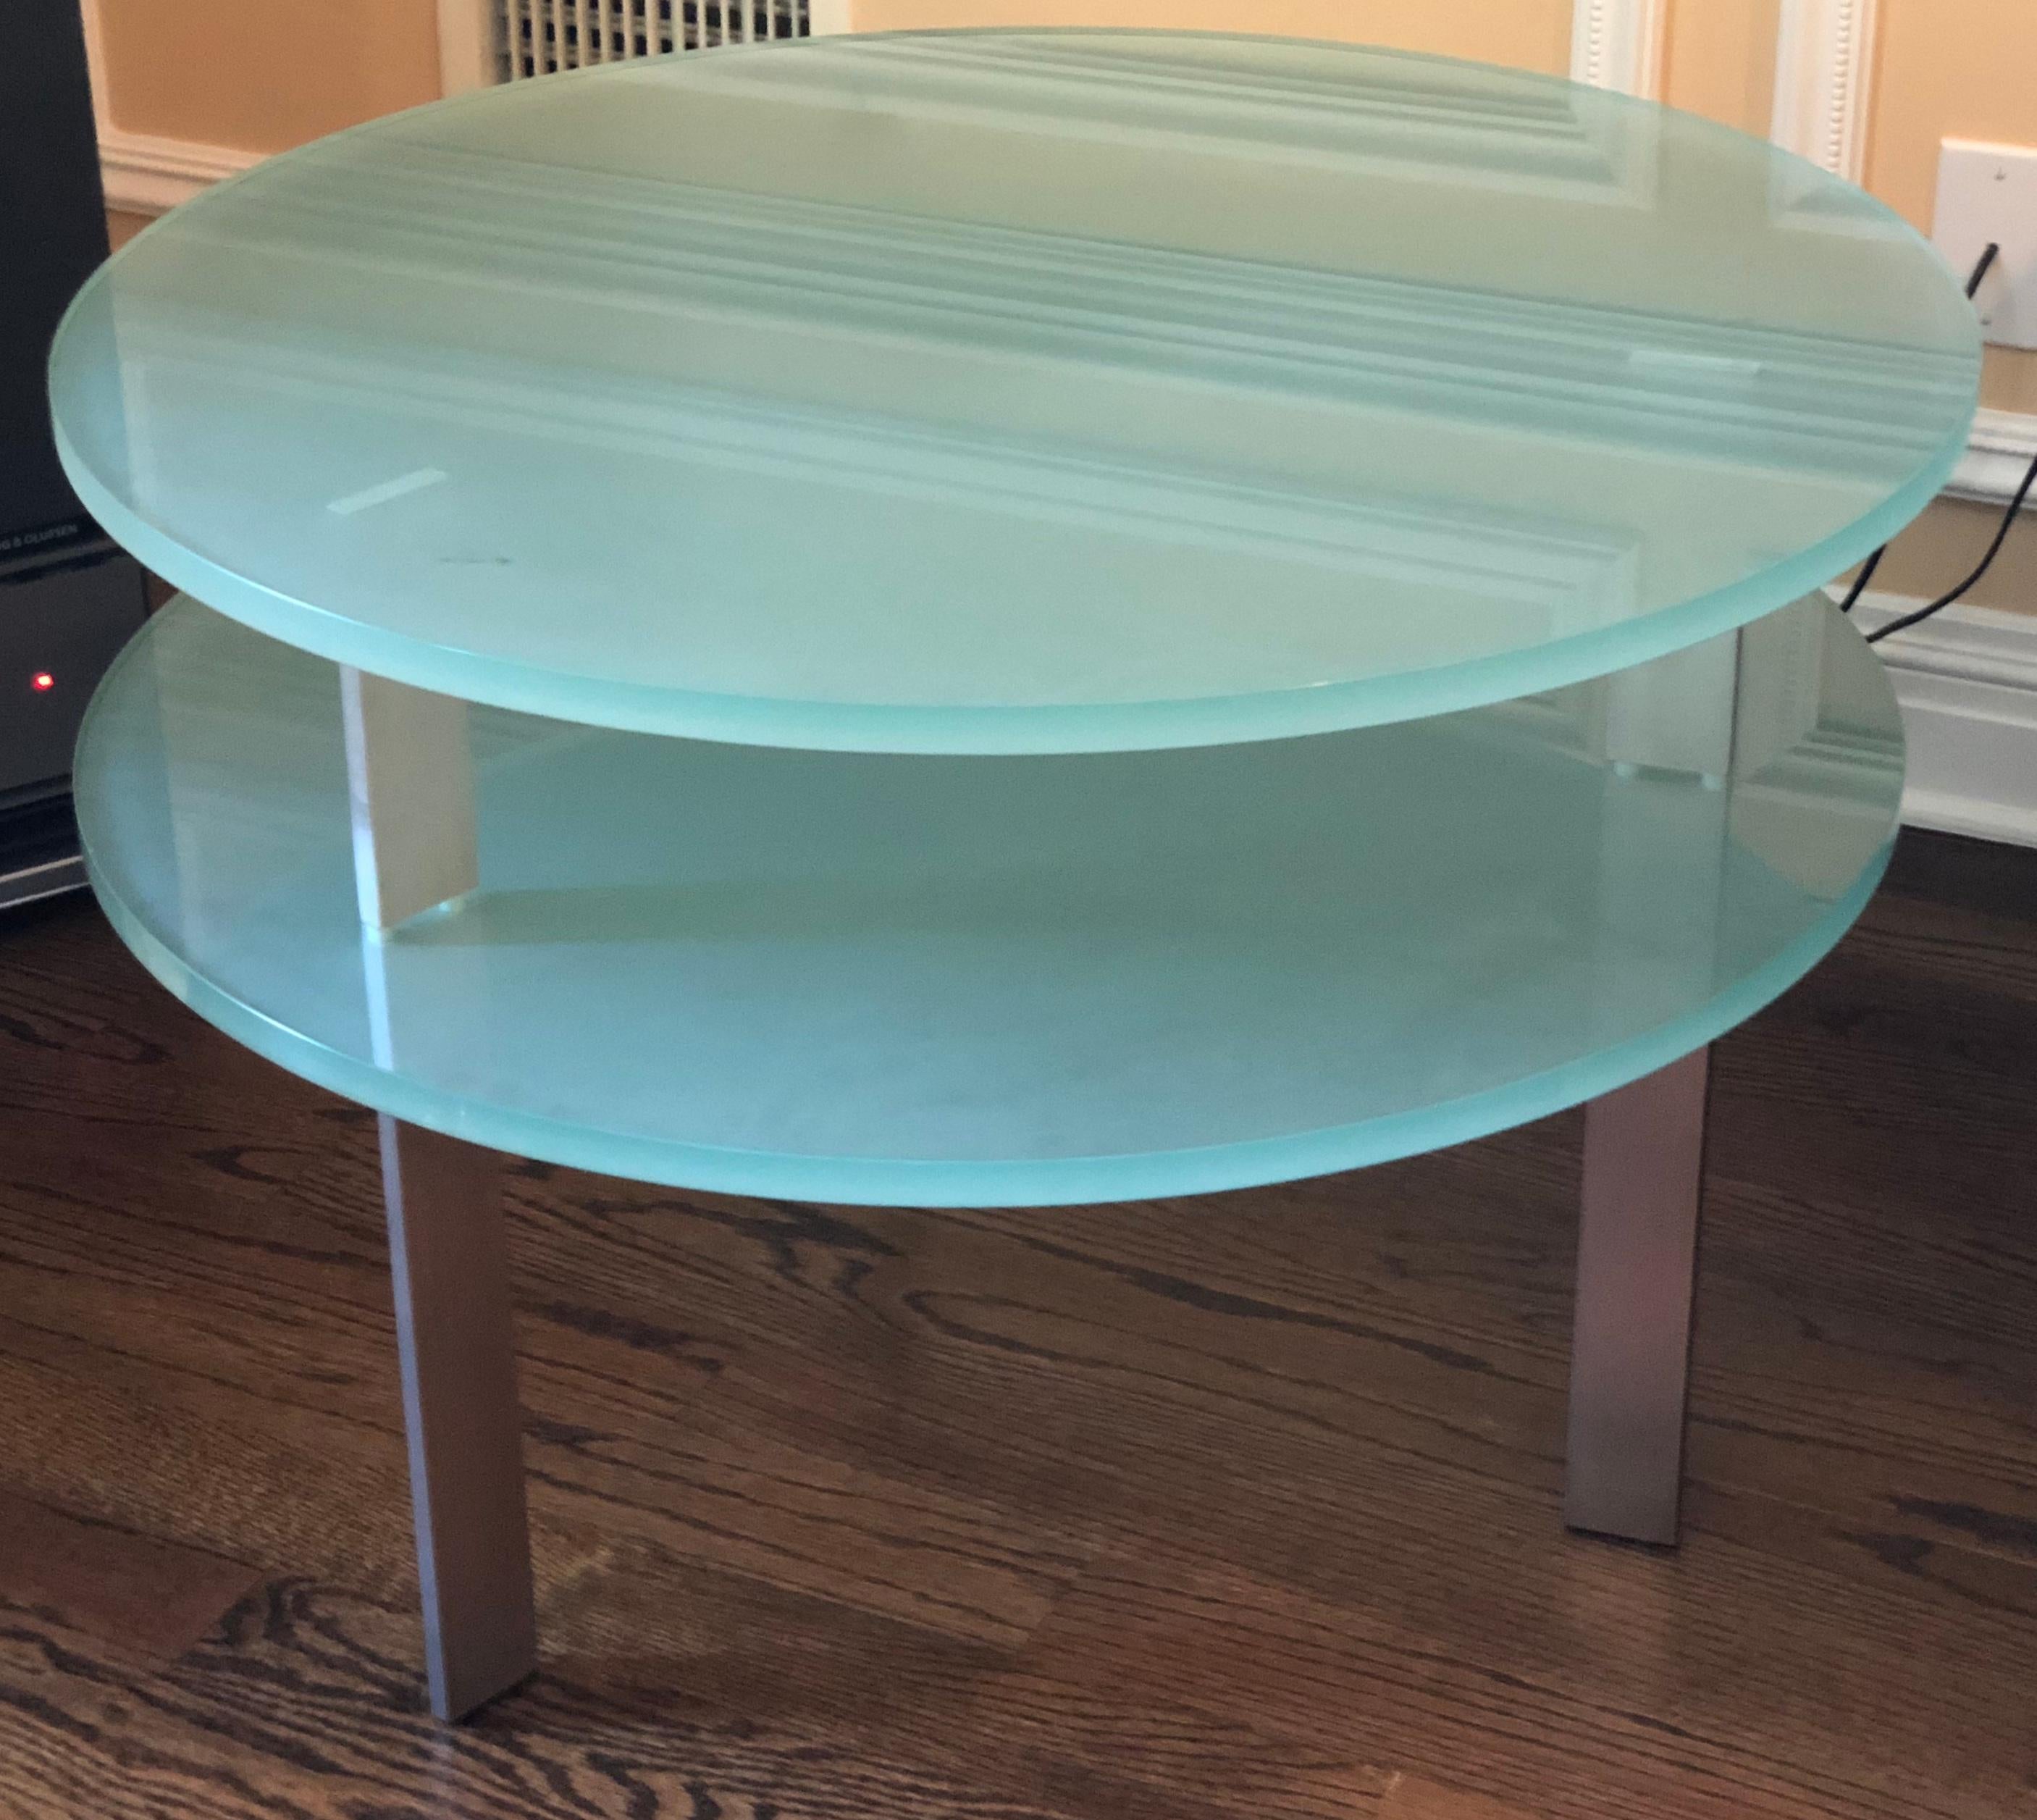 Frosted two level glass round end table by Pace Collection with matte aluminum legs. The lower shelf sits at 15.5